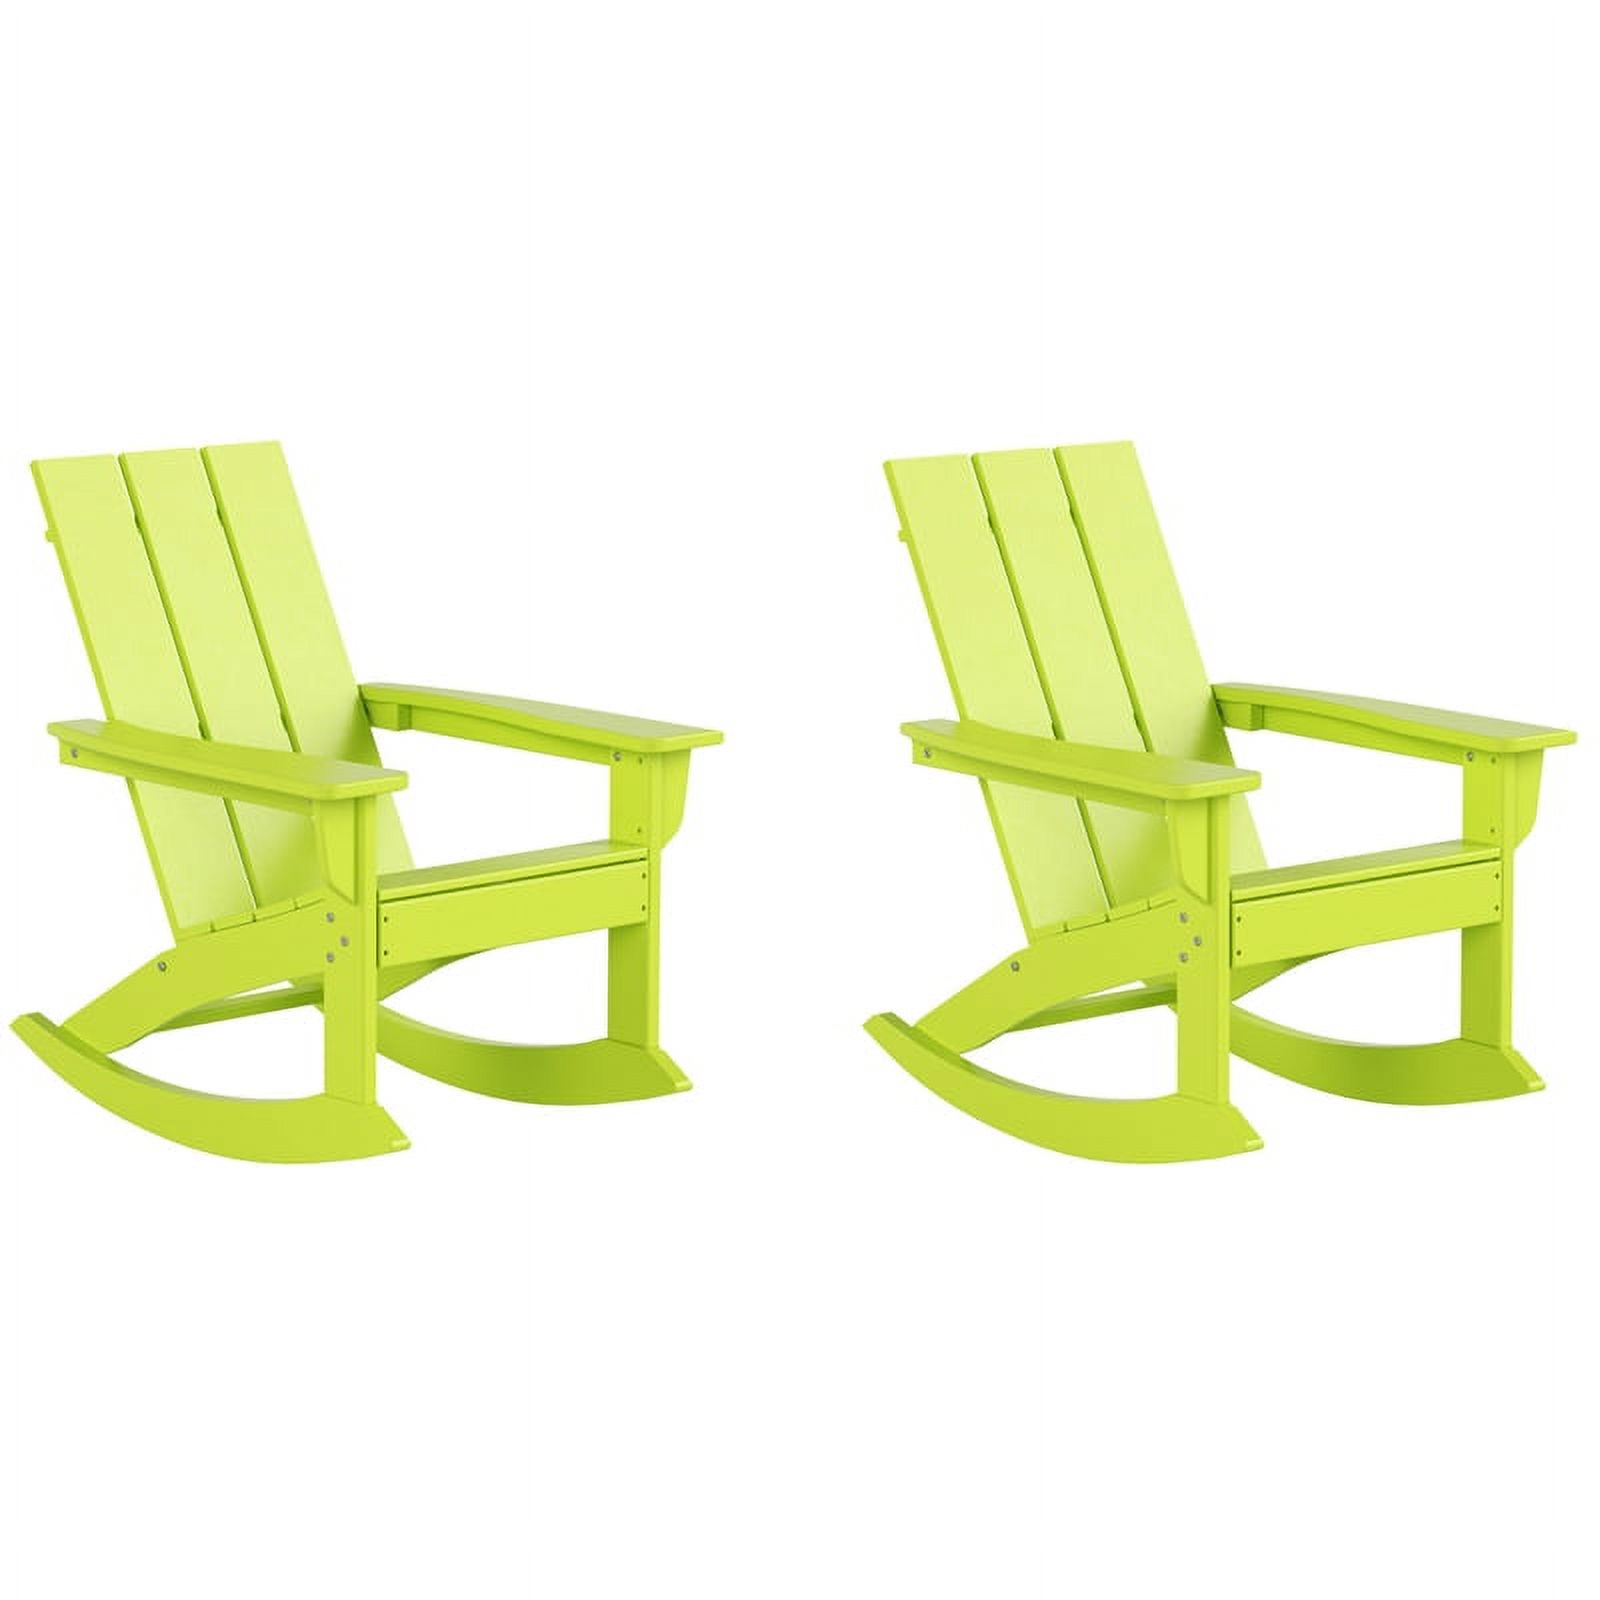 Costaelm Palms Outdoor HDPE Plastic Adirondack Rocking Chair (Set of 2), Lime - image 1 of 8